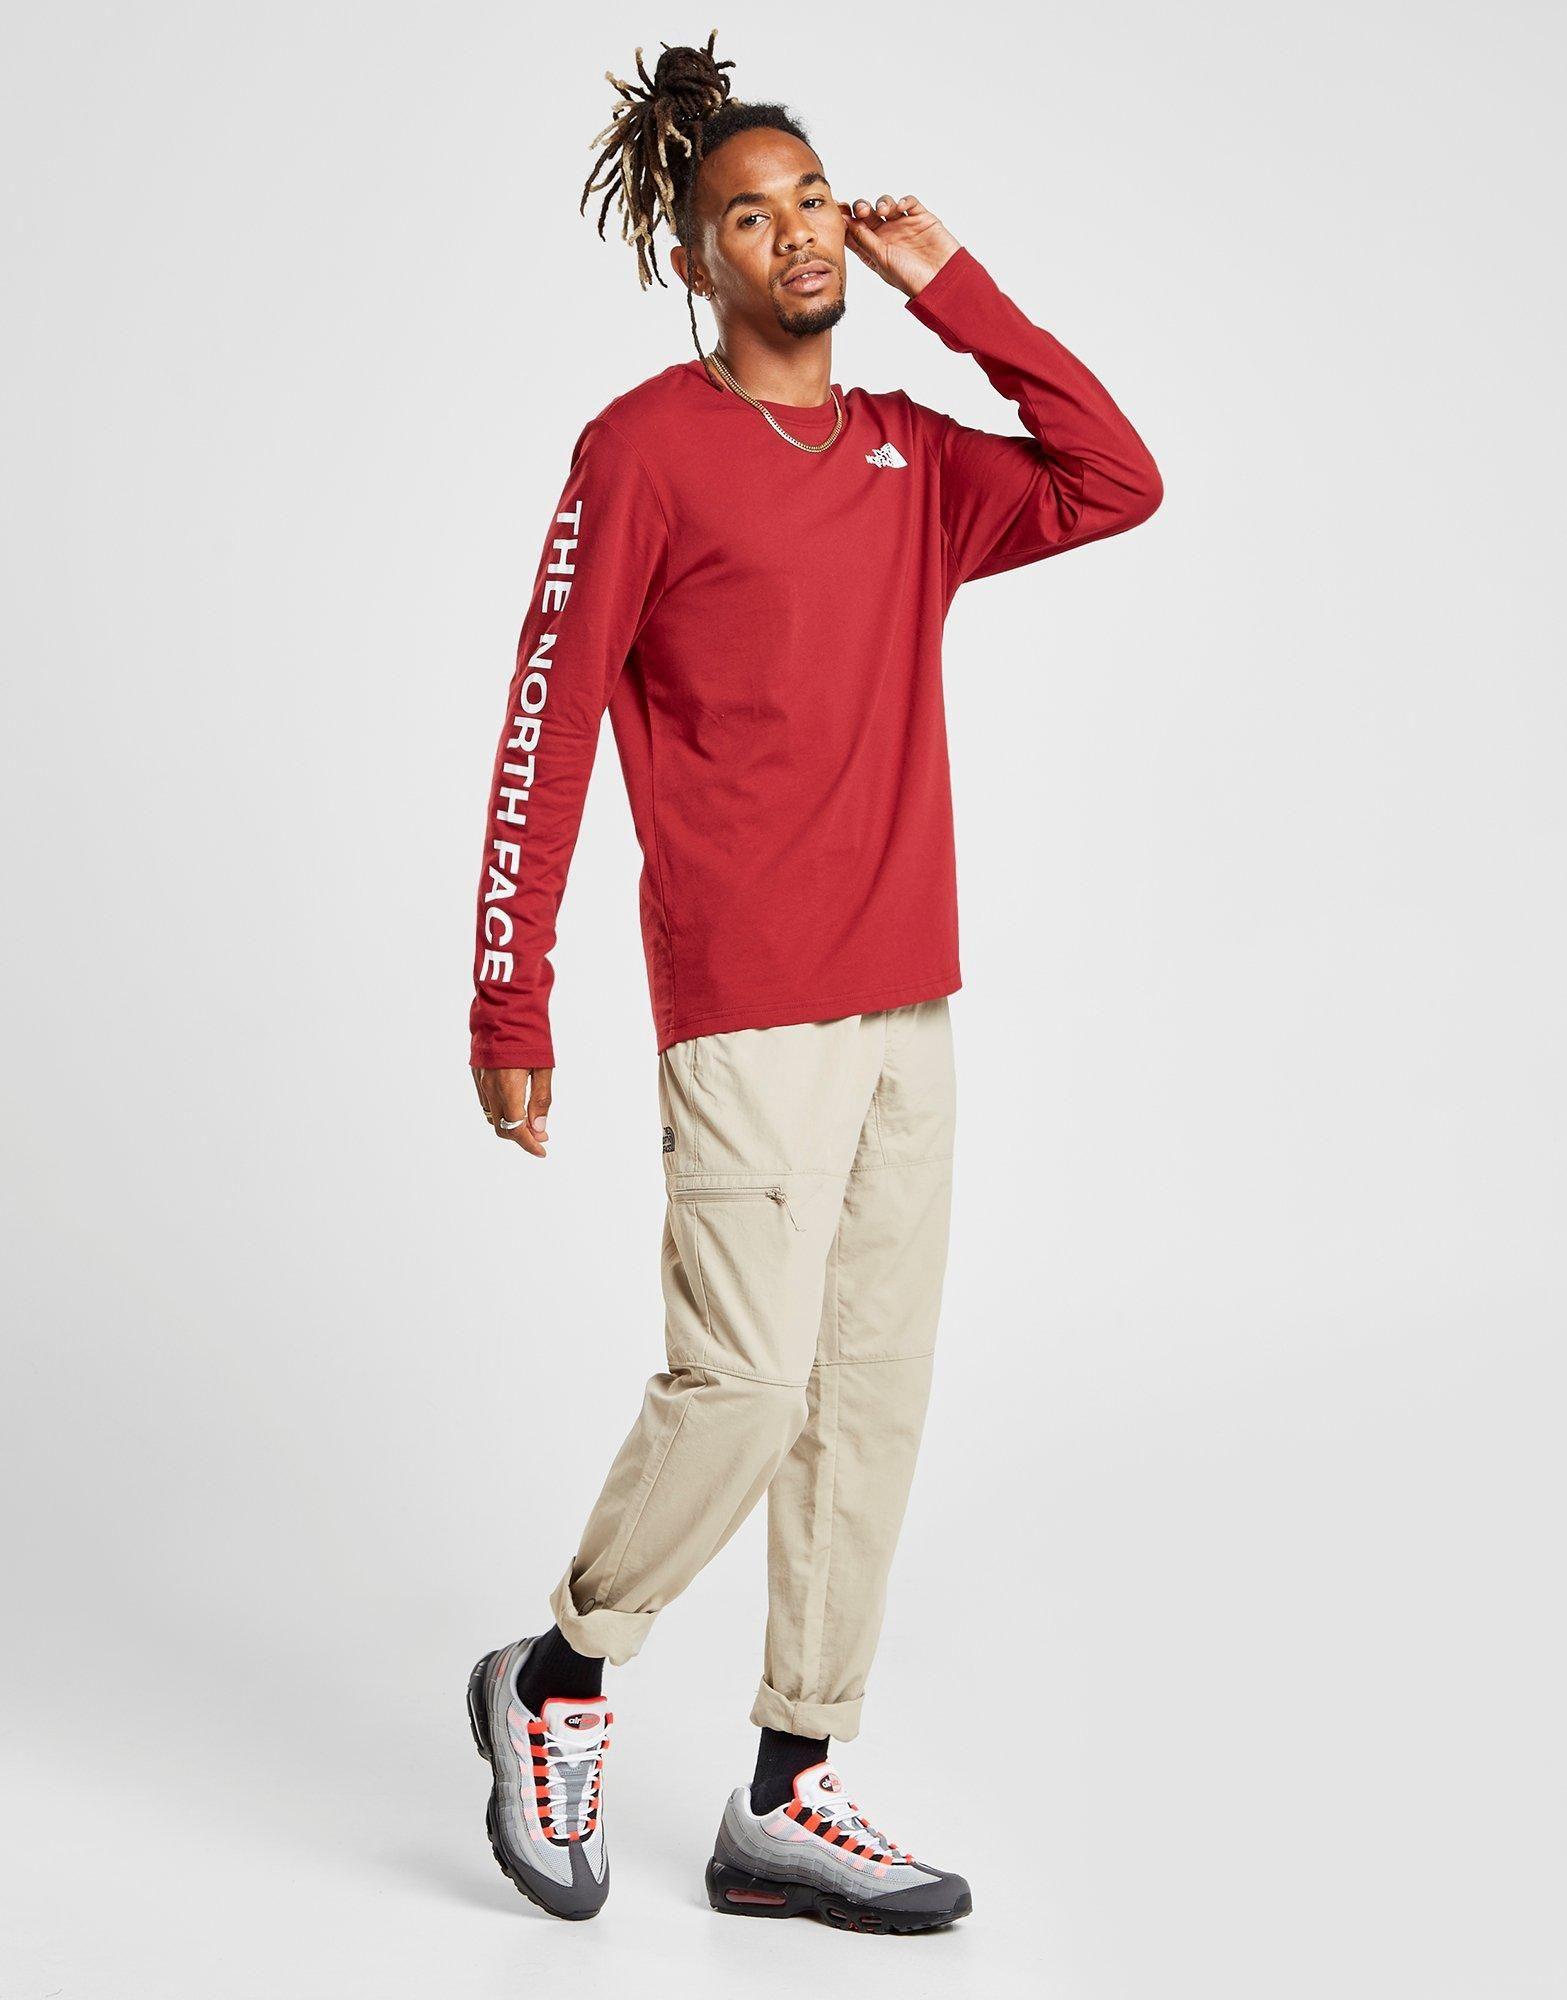 Red and White Fashion Logo - The North Face Long Sleeve Logo T-shirt in Red for Men - Lyst